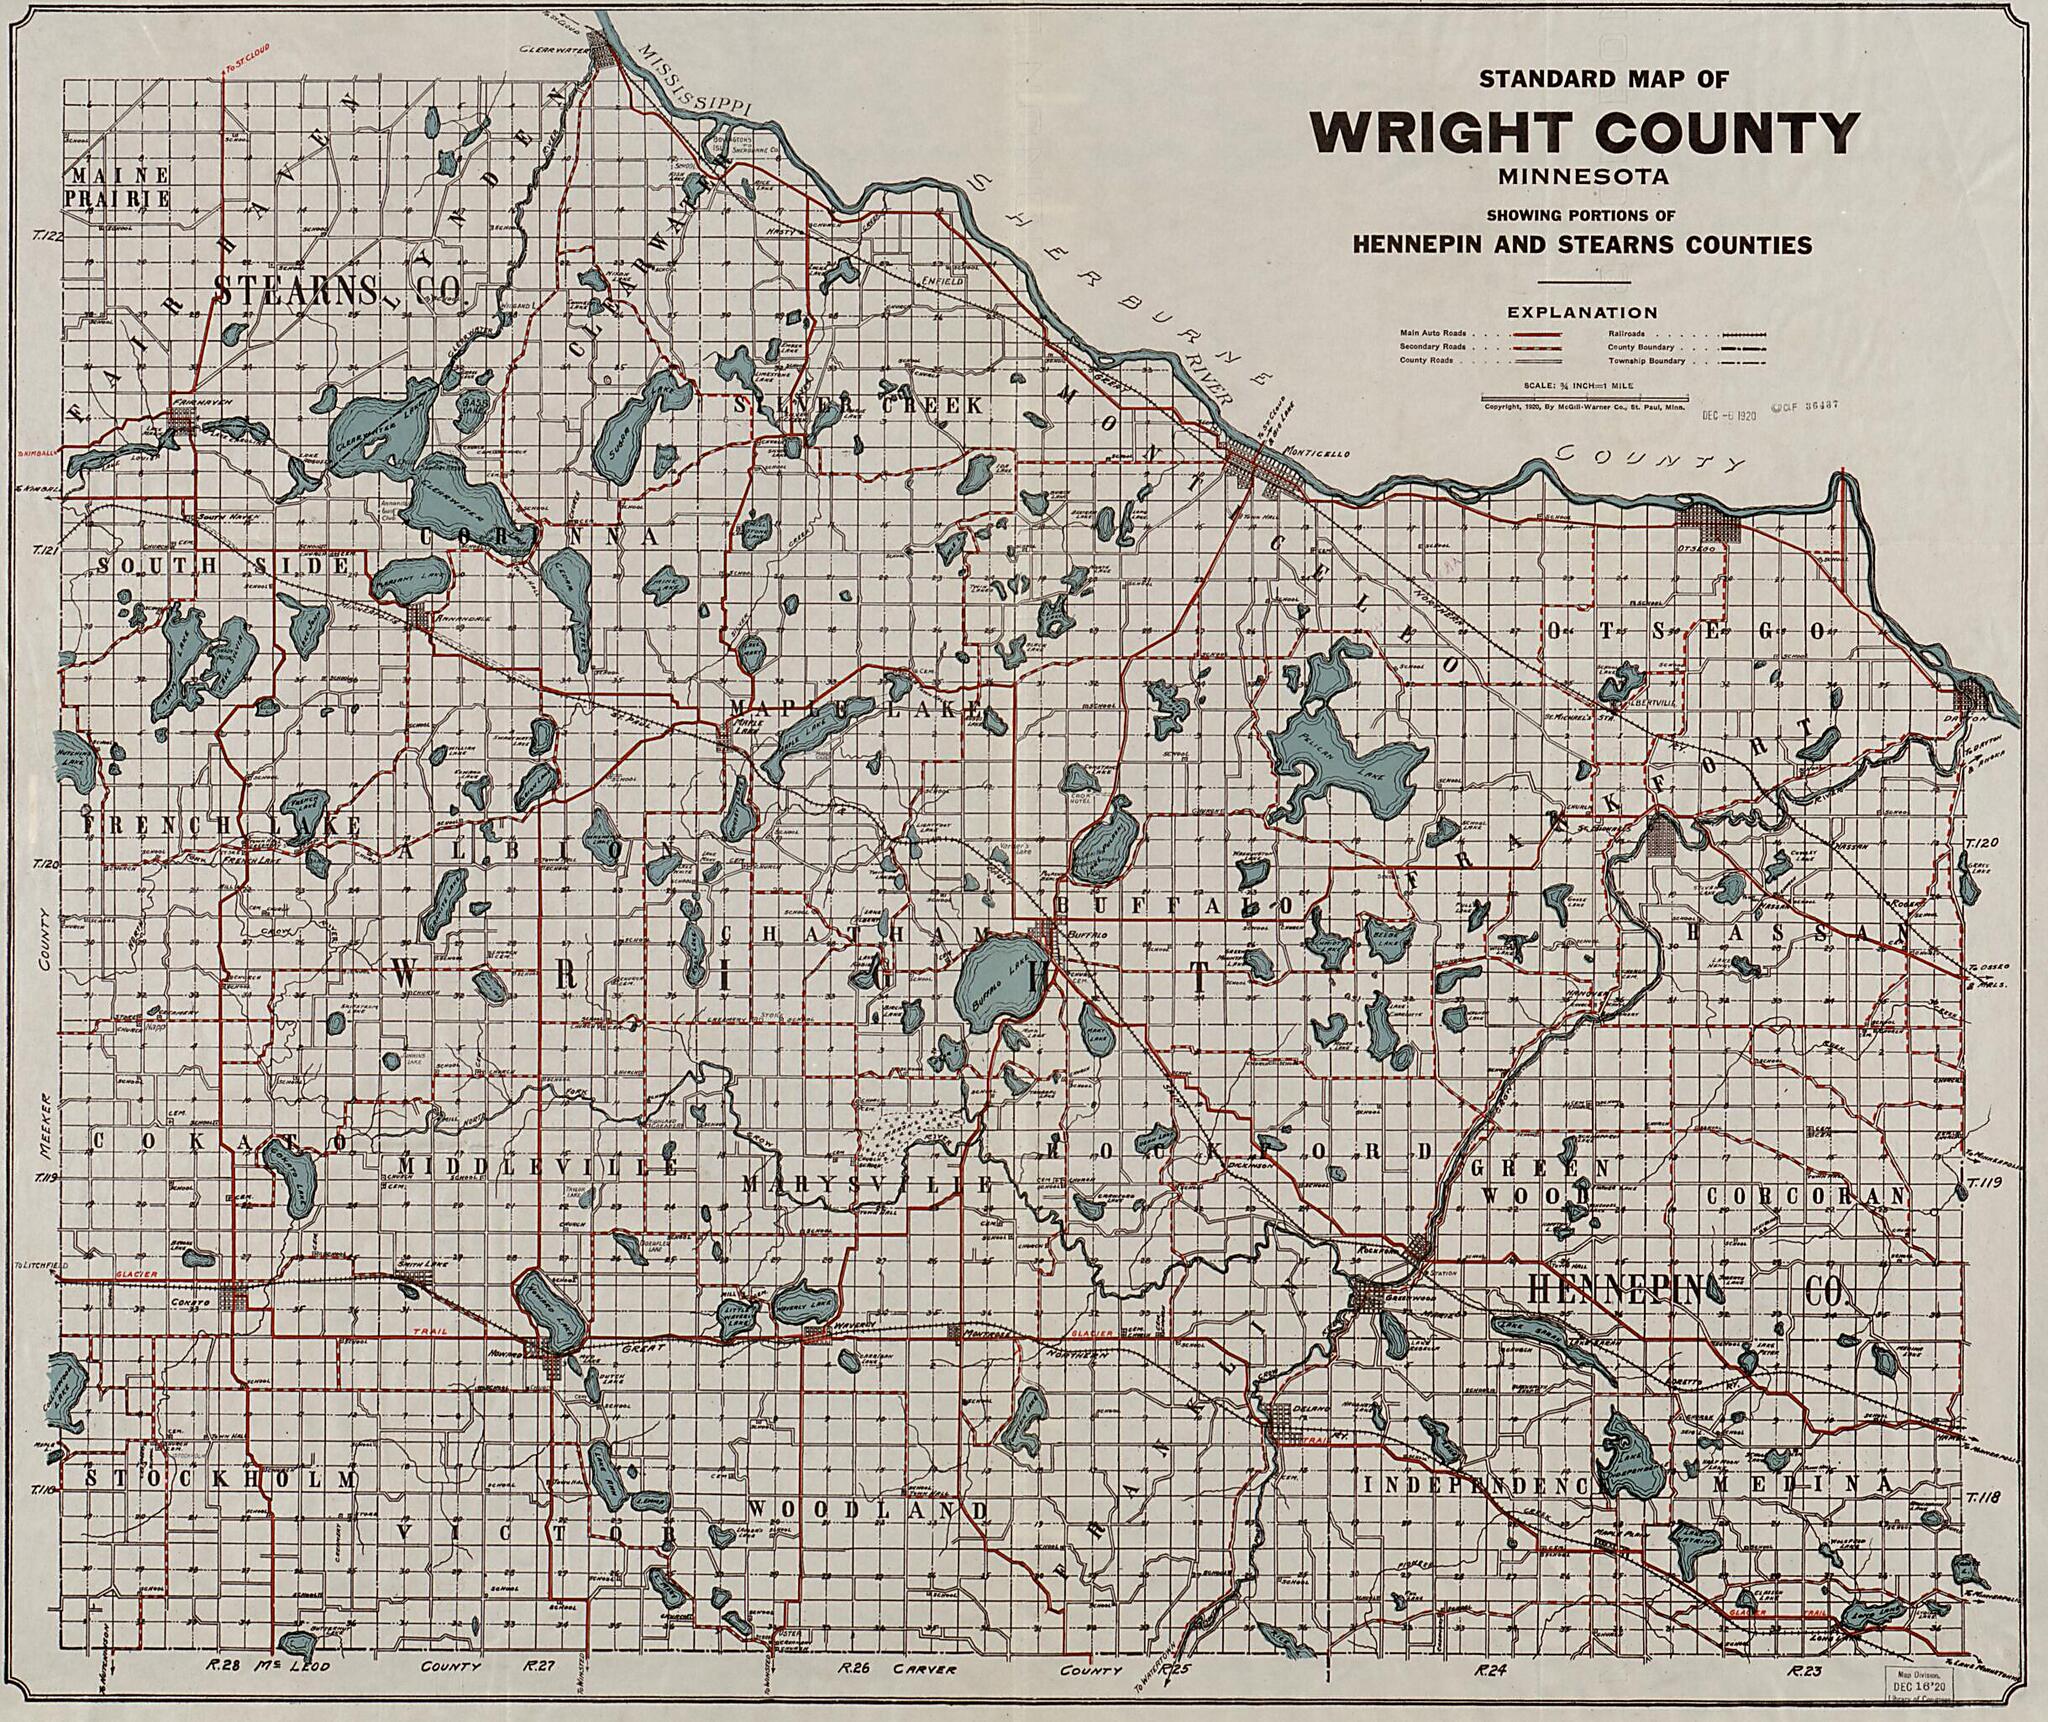 This old map of Standard Map of Wright County, Minnesota : Showing Portions of Hennepin and Stearns Counties from 1920 was created by  Warner Co in 1920